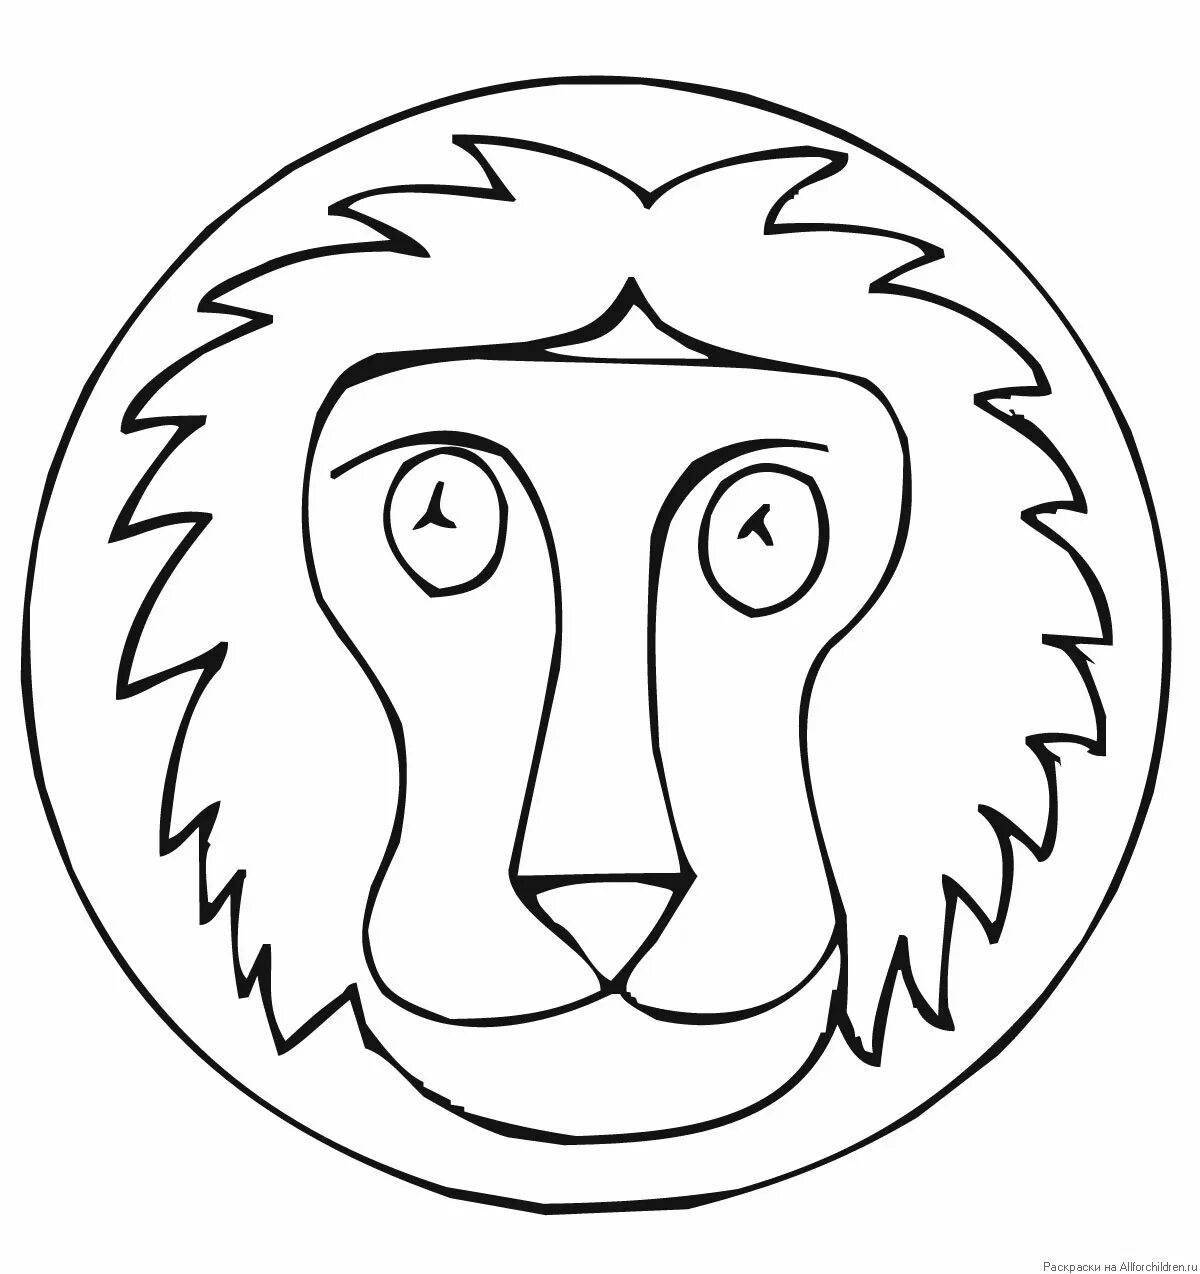 Coloring book shiny muzzle of a lion